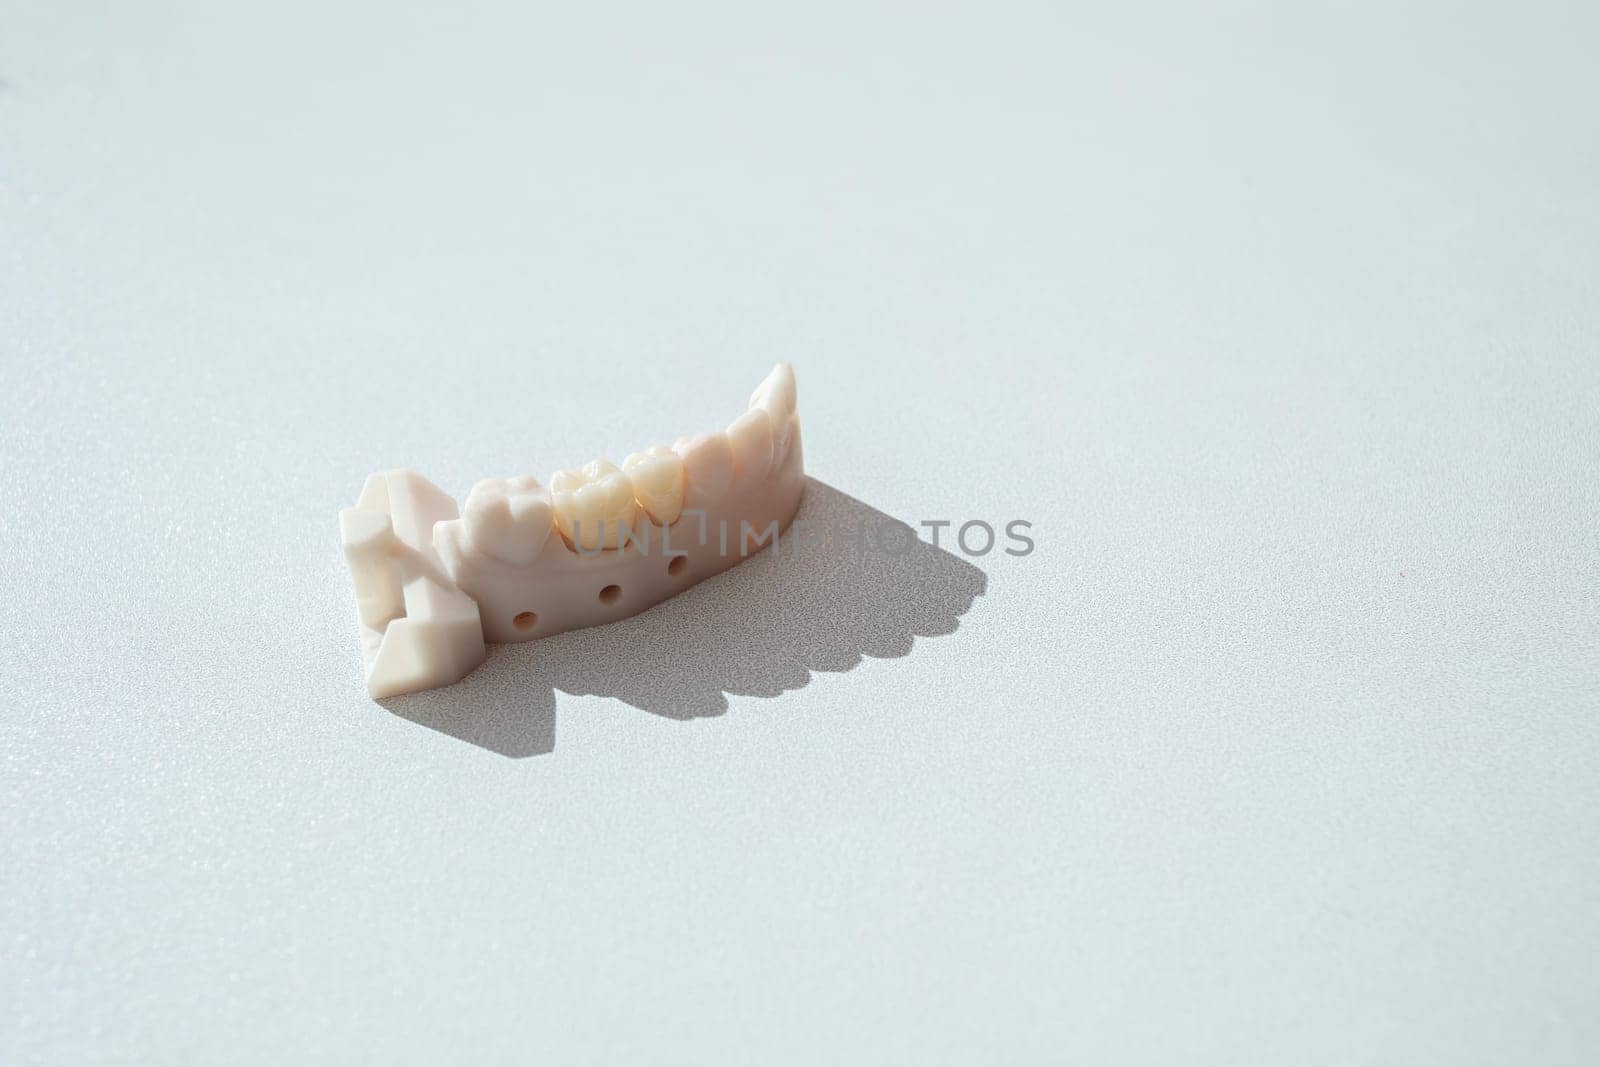 Top View Teeth Crowns, Bridge Dental Equipment Model For Tooth Restoration. Inserting Or Placing Procedure Of Ceramic Dental Crown. Horizontal View, Space For Text. High quality photo